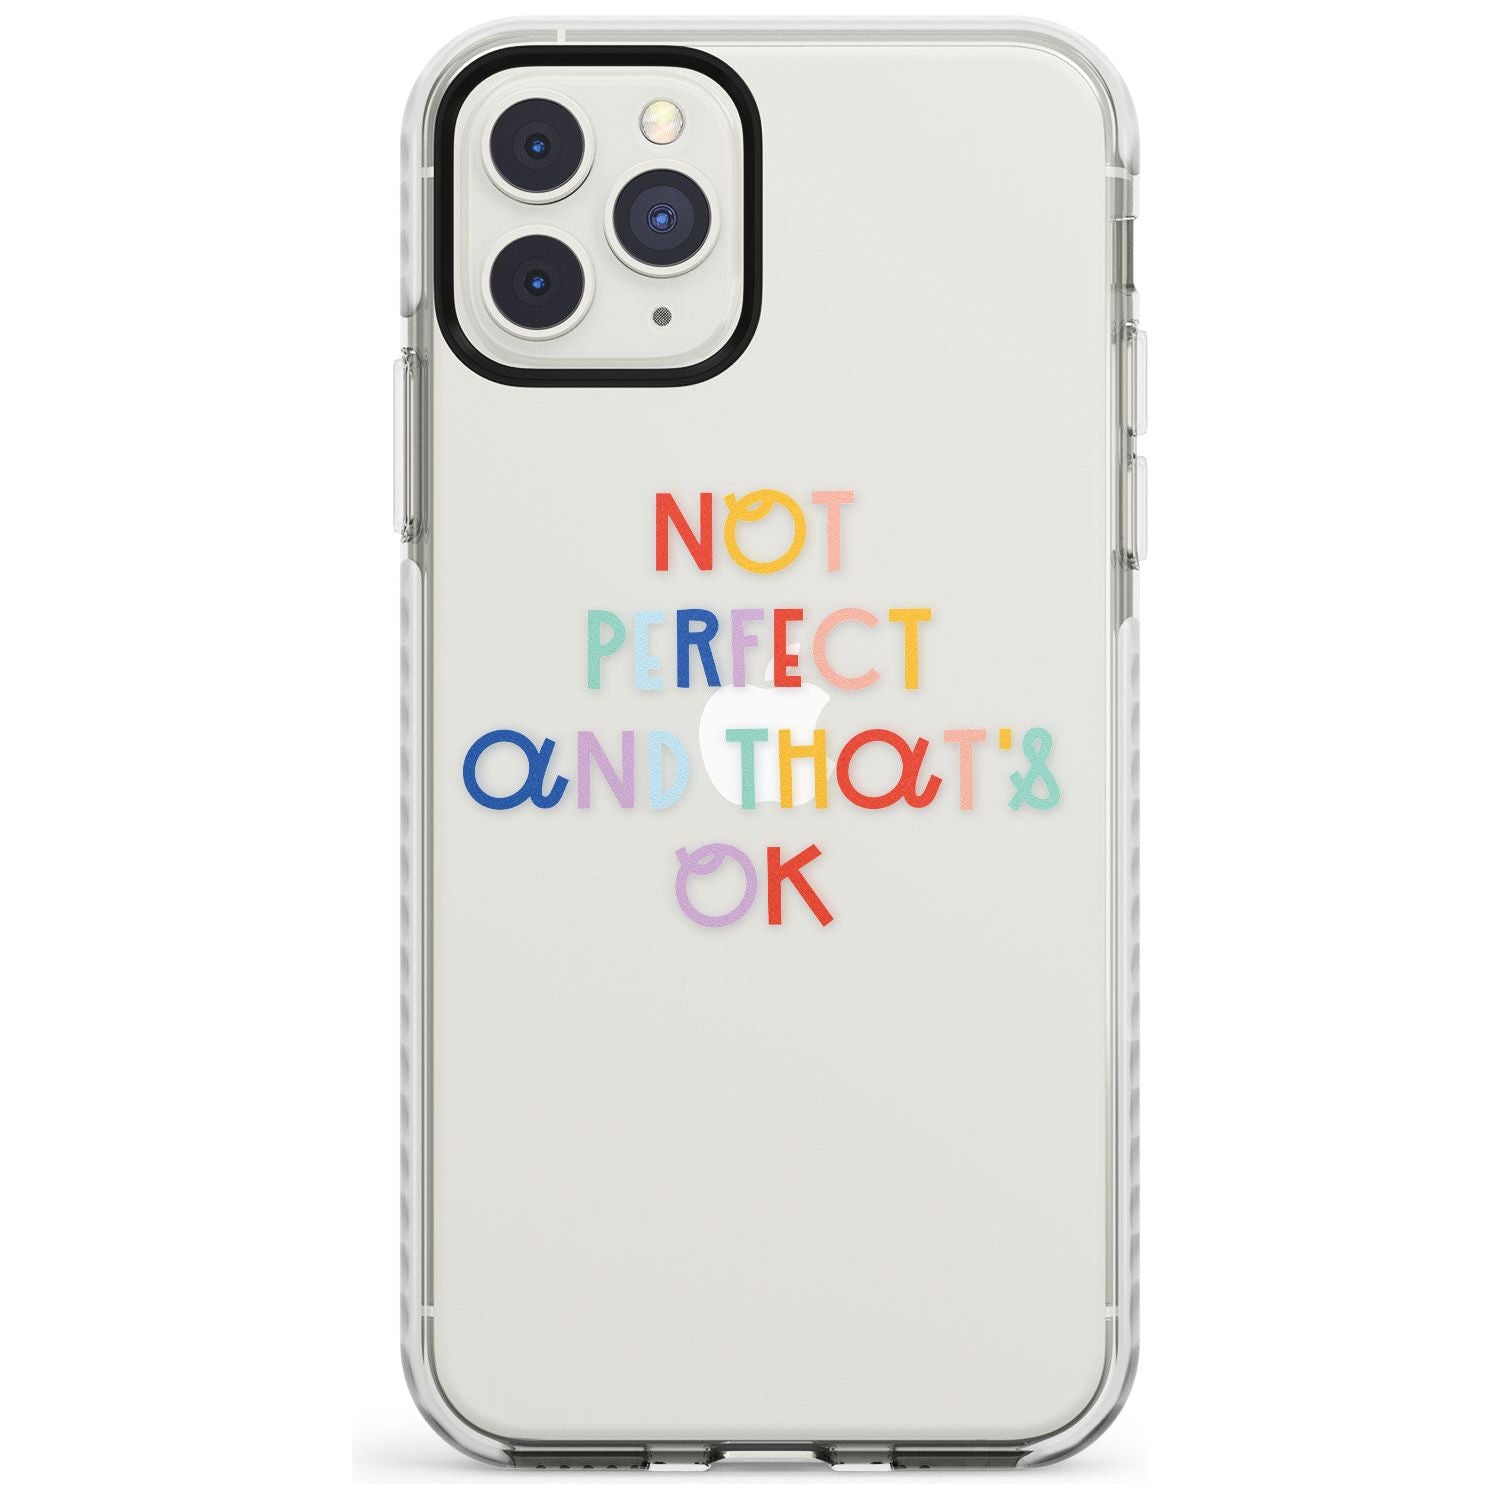 Not Perfect - Clear Impact Phone Case for iPhone 11 Pro Max